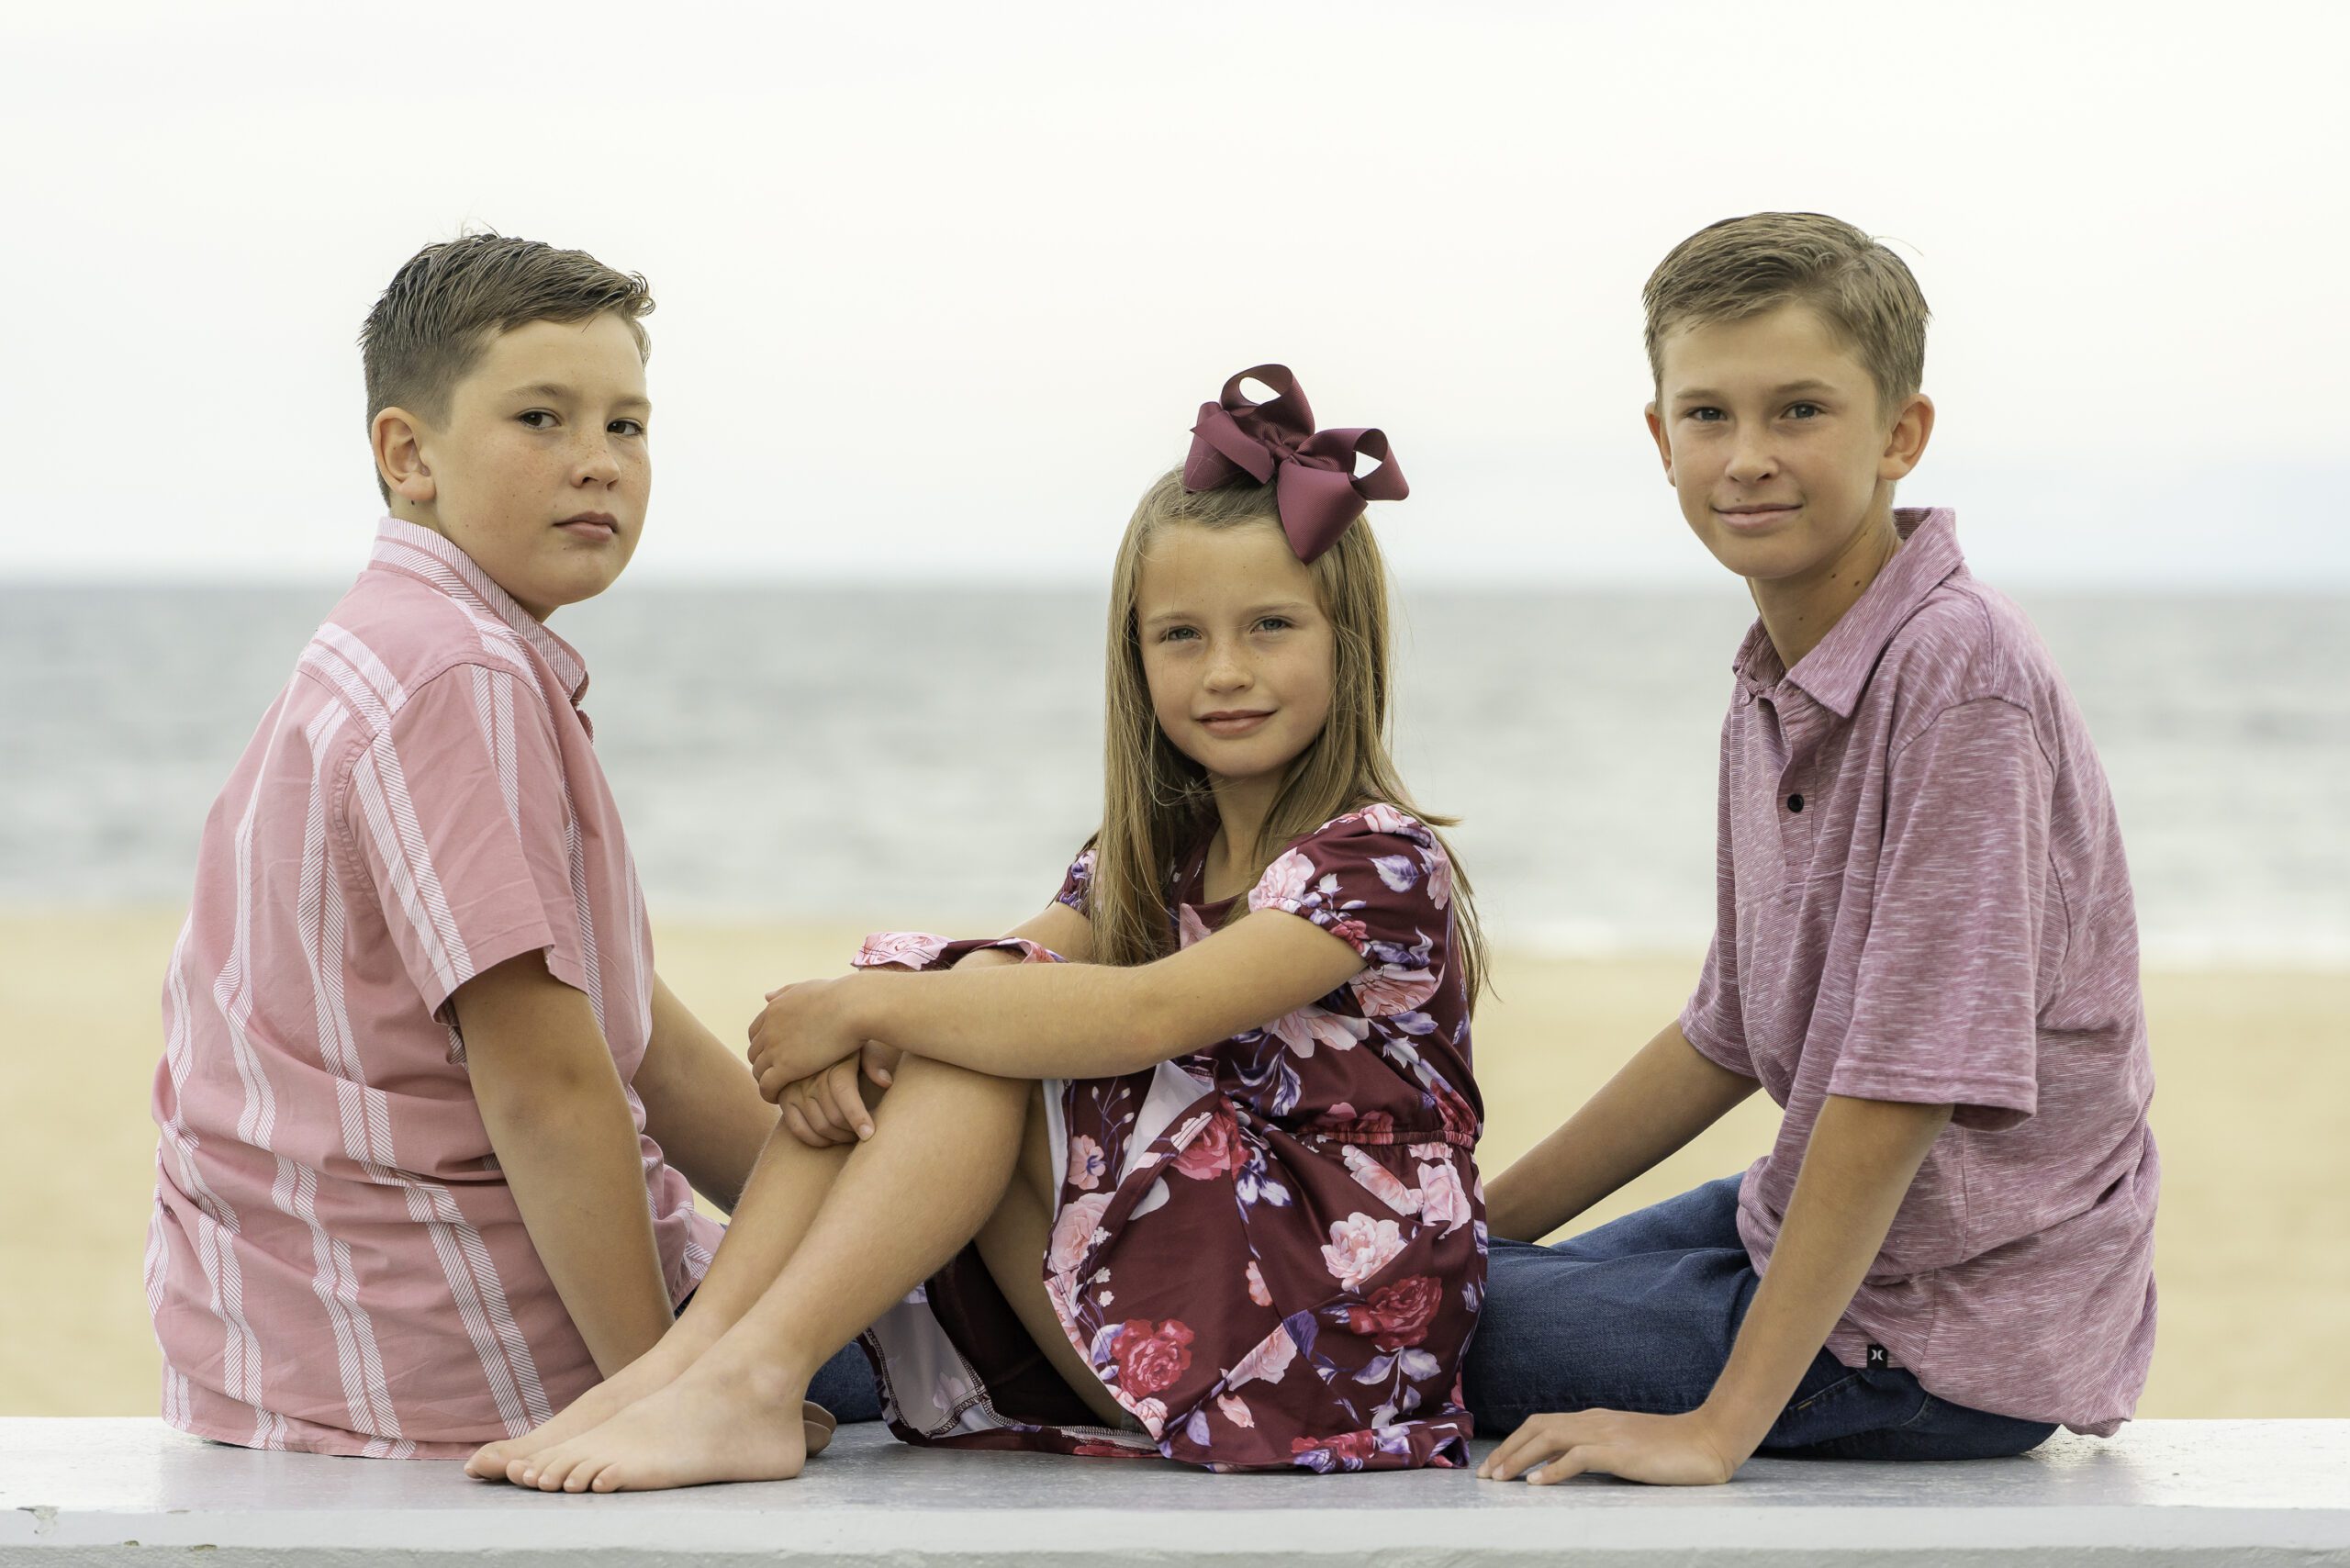 three young children sitting on the beach posing for a photo